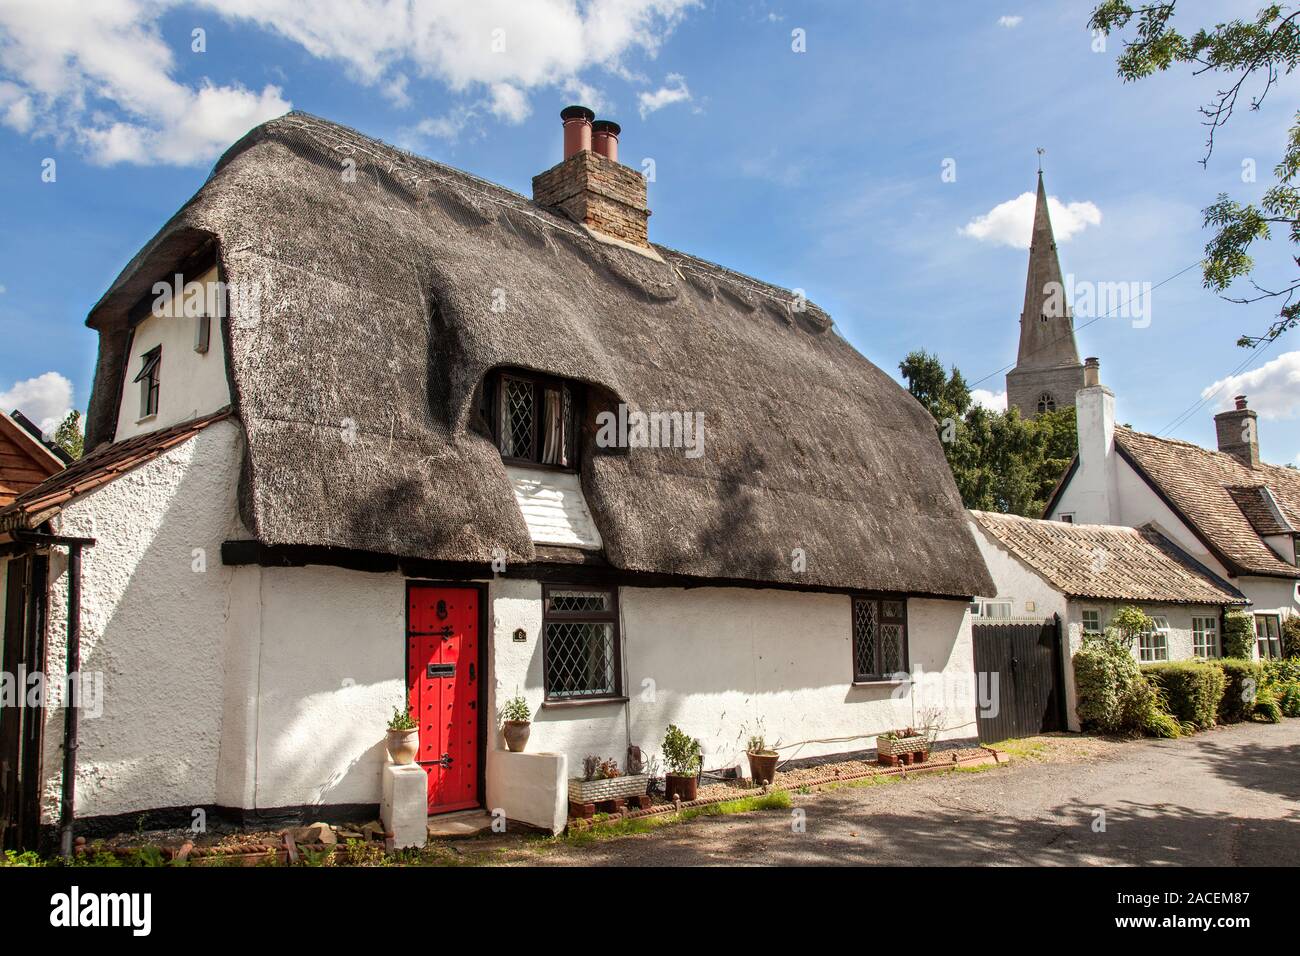 Typical English Thatched Cottage Stock Photo 334696103 Alamy